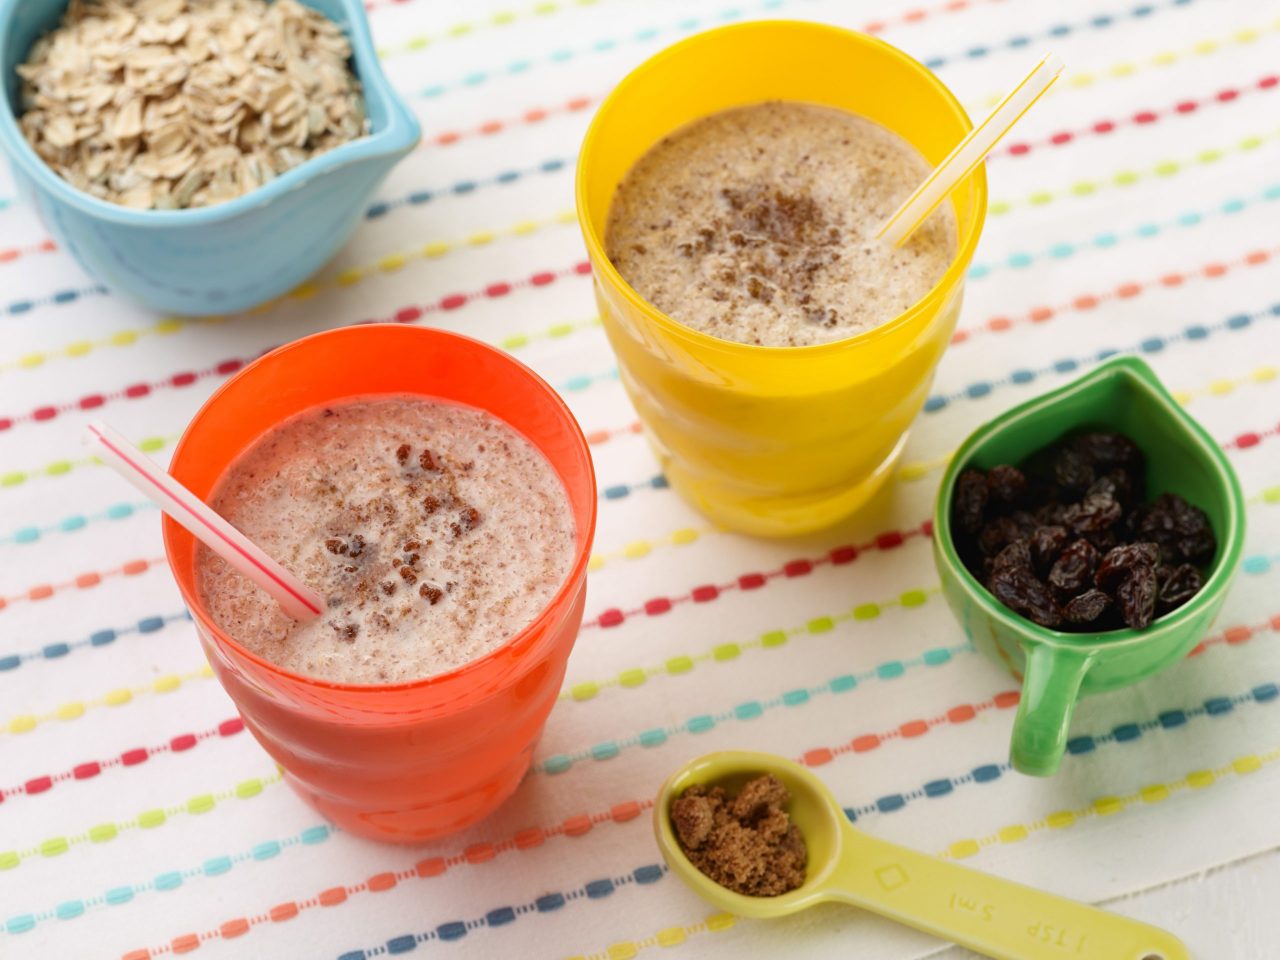 Food Network Kid's: Kids Can Make Oatmeal Cookie Smoothie